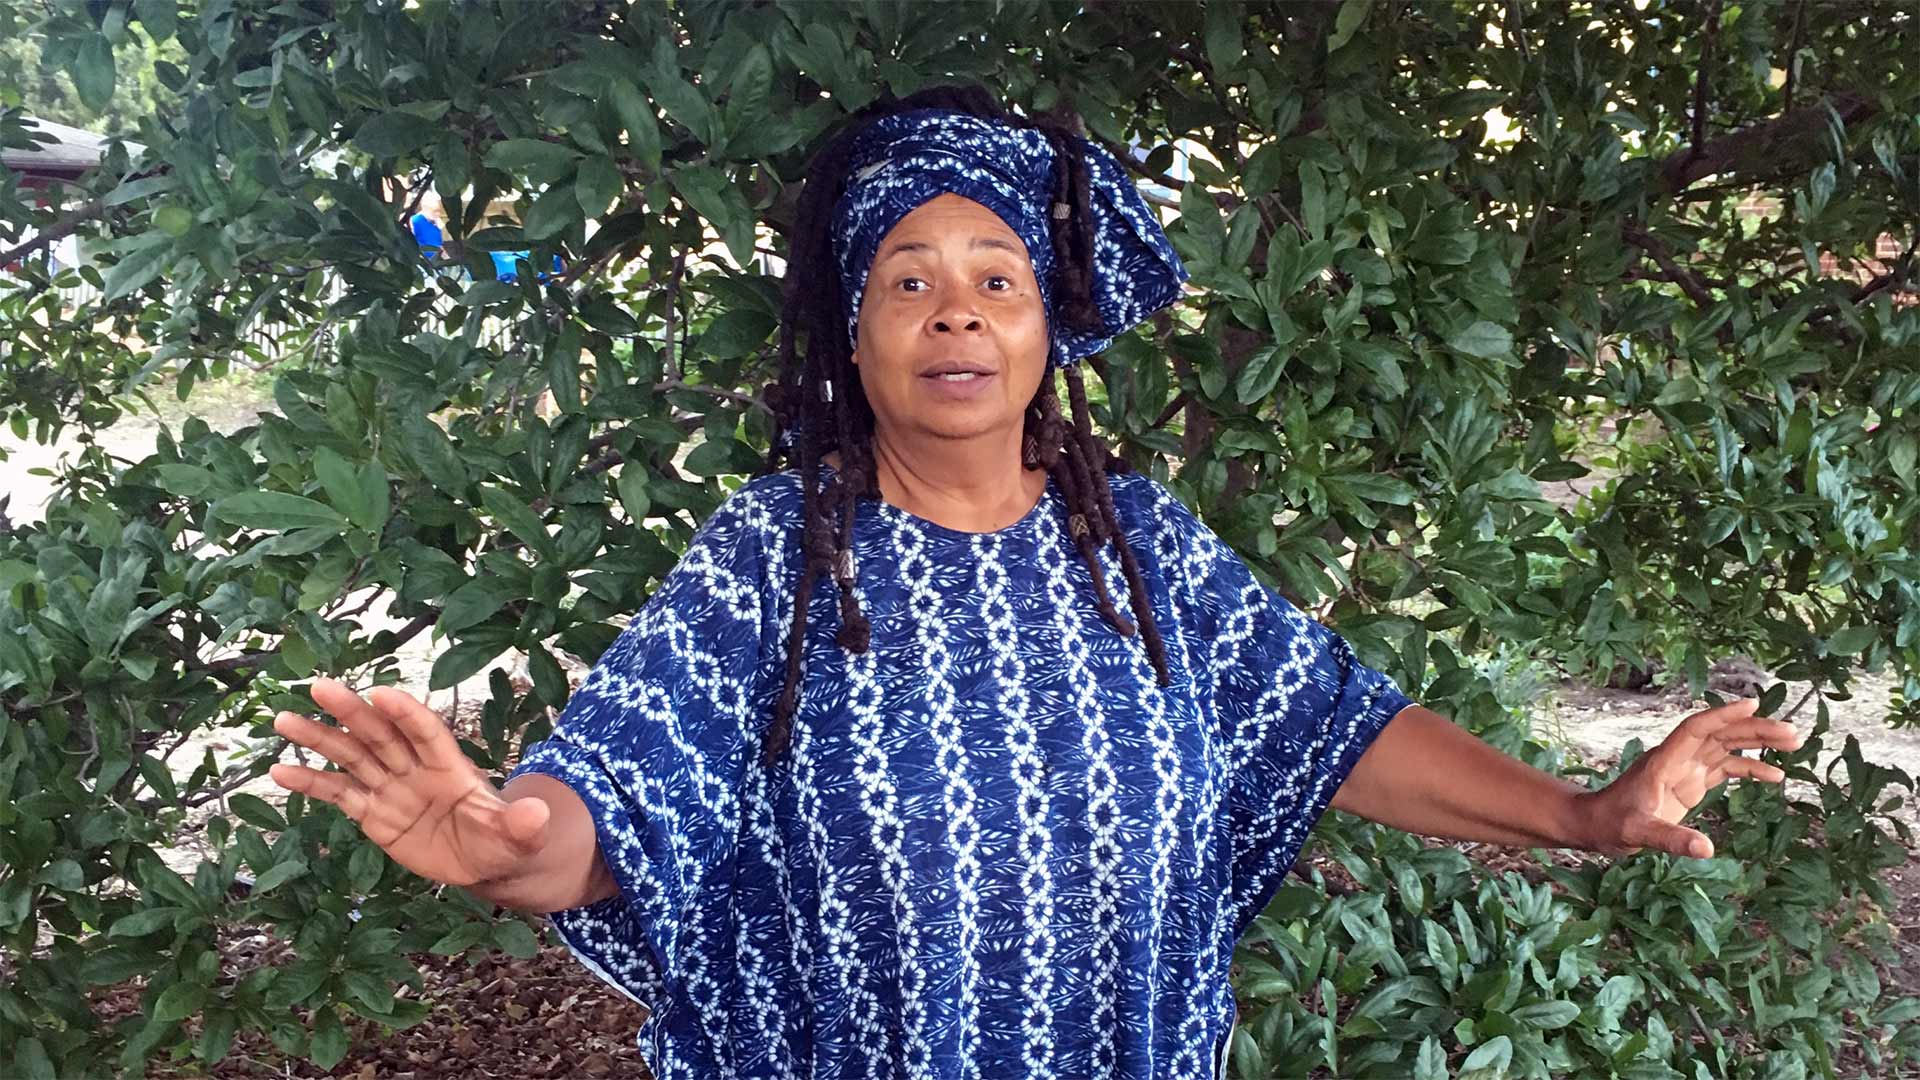 Dawn Blackman poses outdoors with arms outstretched in front of a large bush.